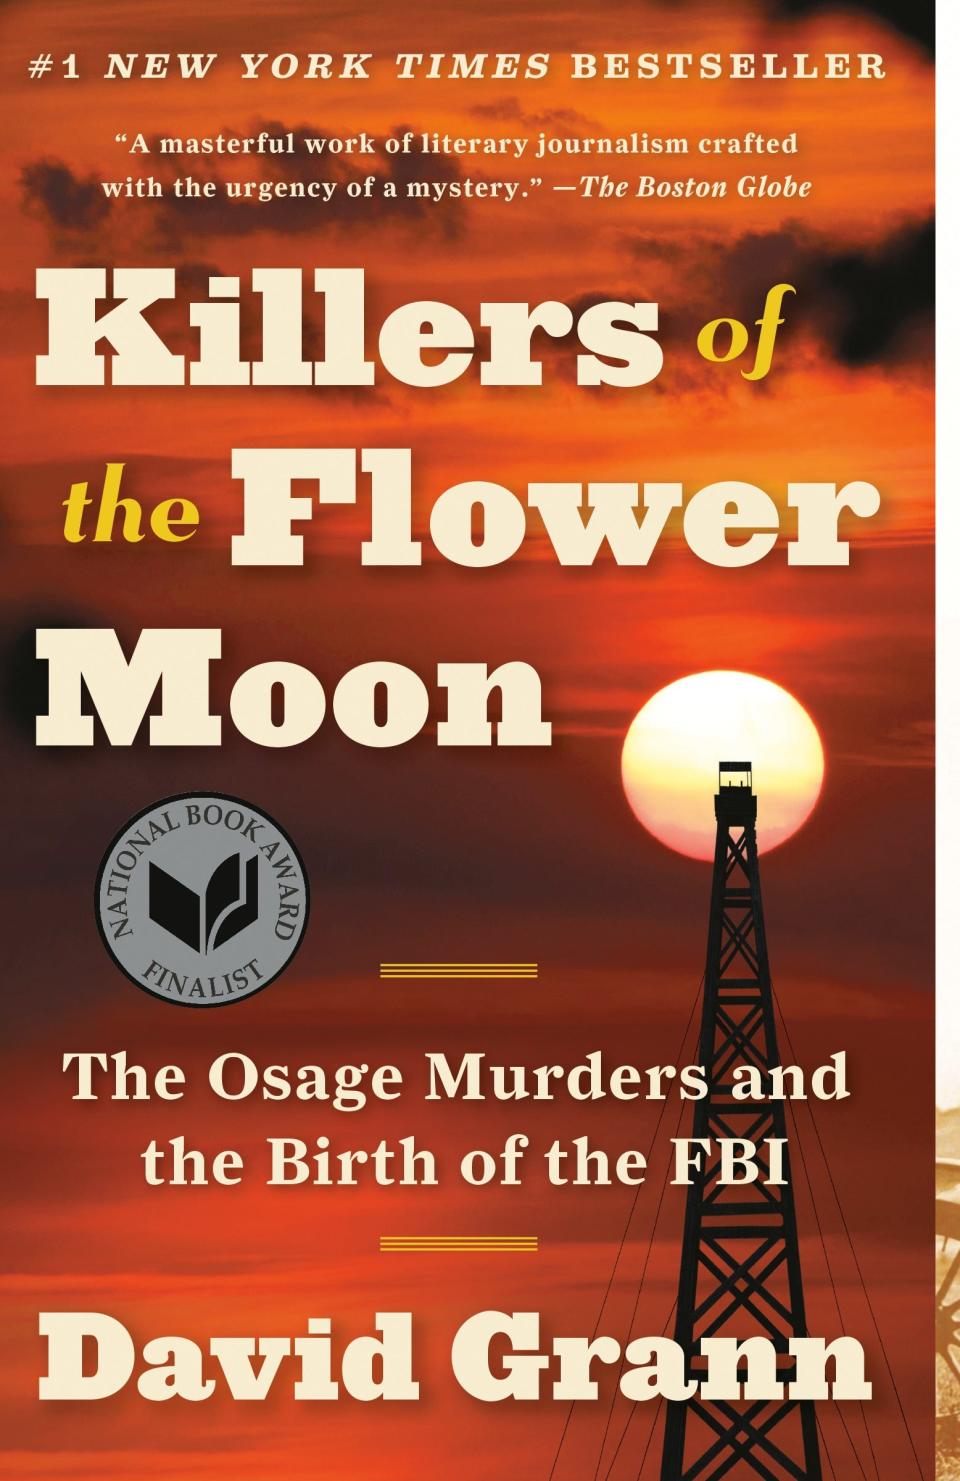 David Grann's bestselling book, "Killer of the Flower Moon" has been adapted into a film directed by Martin Scorsese, starring Leonardo DiCaprio and Robert DeNiro.